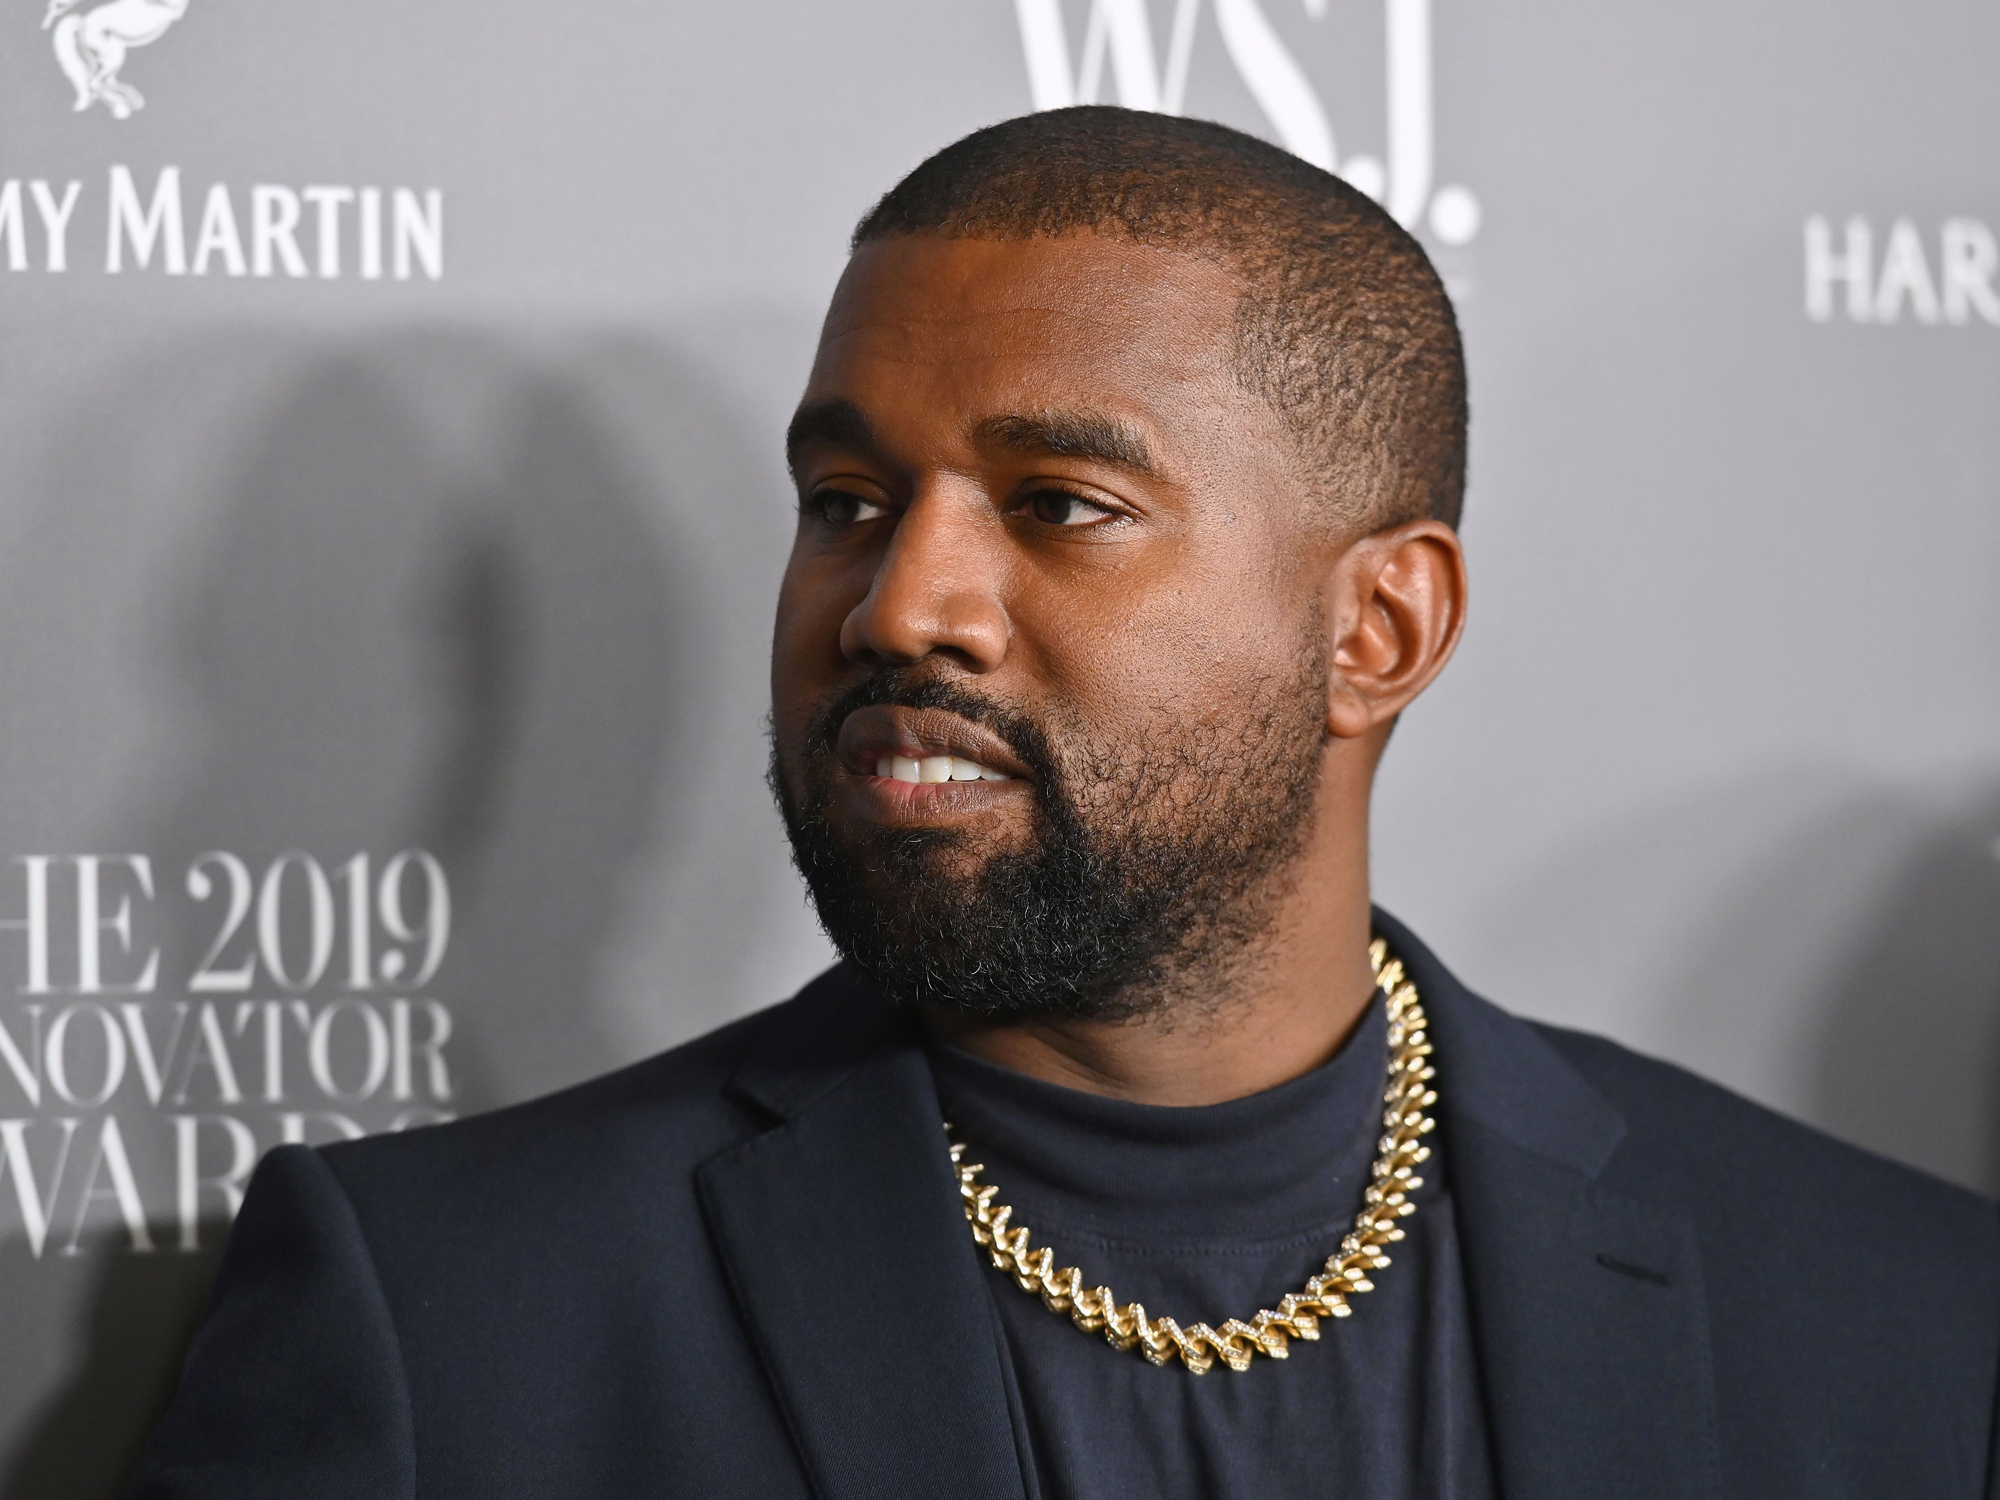 Kanye West: A History of His Antisemitism, Hate Speech and Controversy